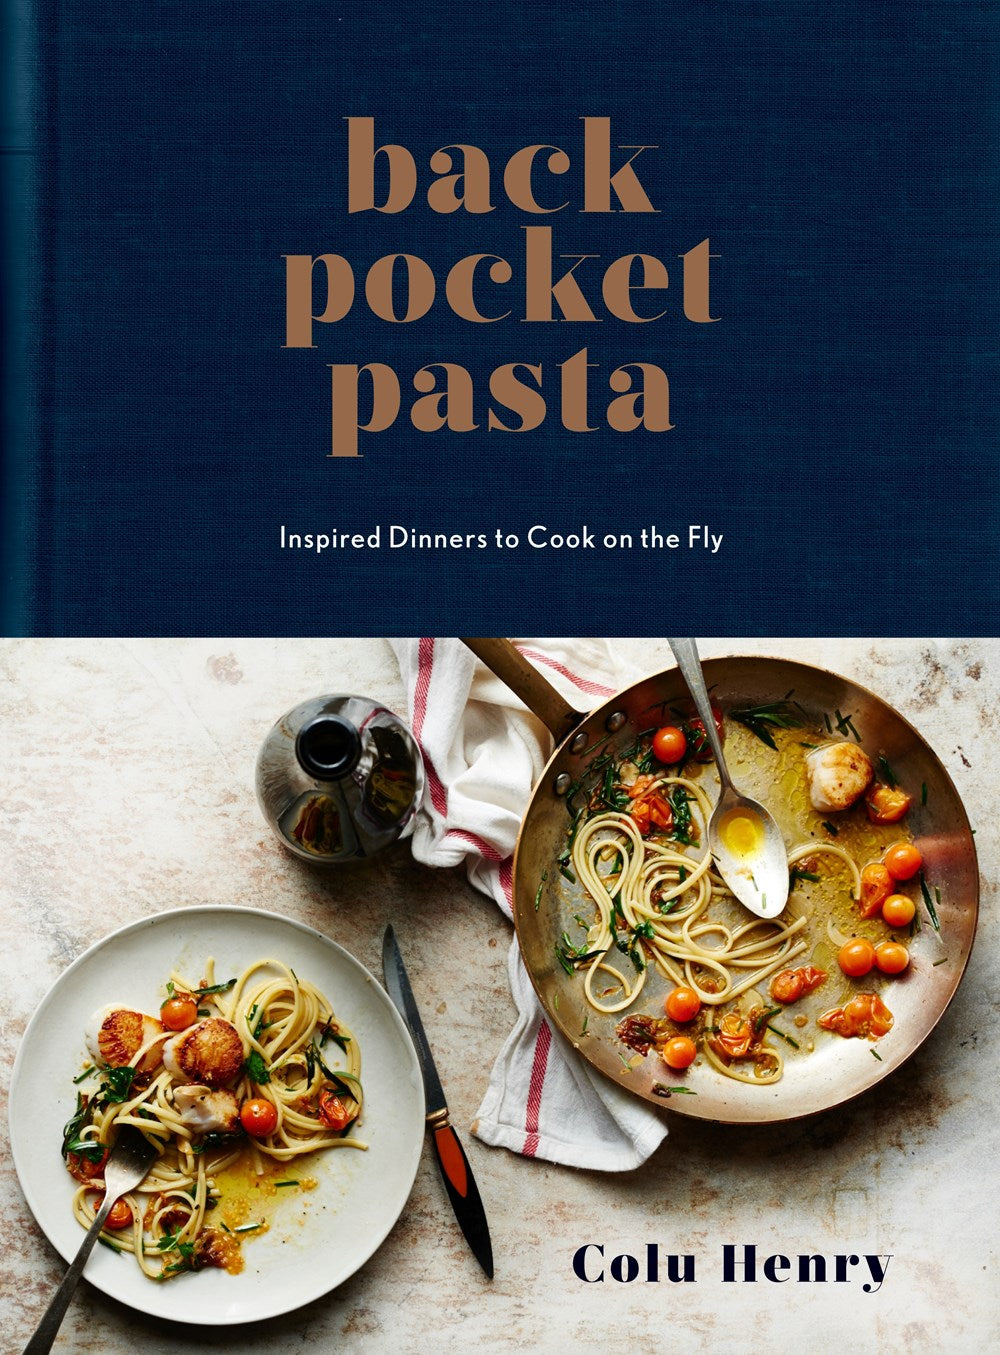 Back Pocket Pasta: Inspired Dinners to Cook on the Fly by Colu Henry